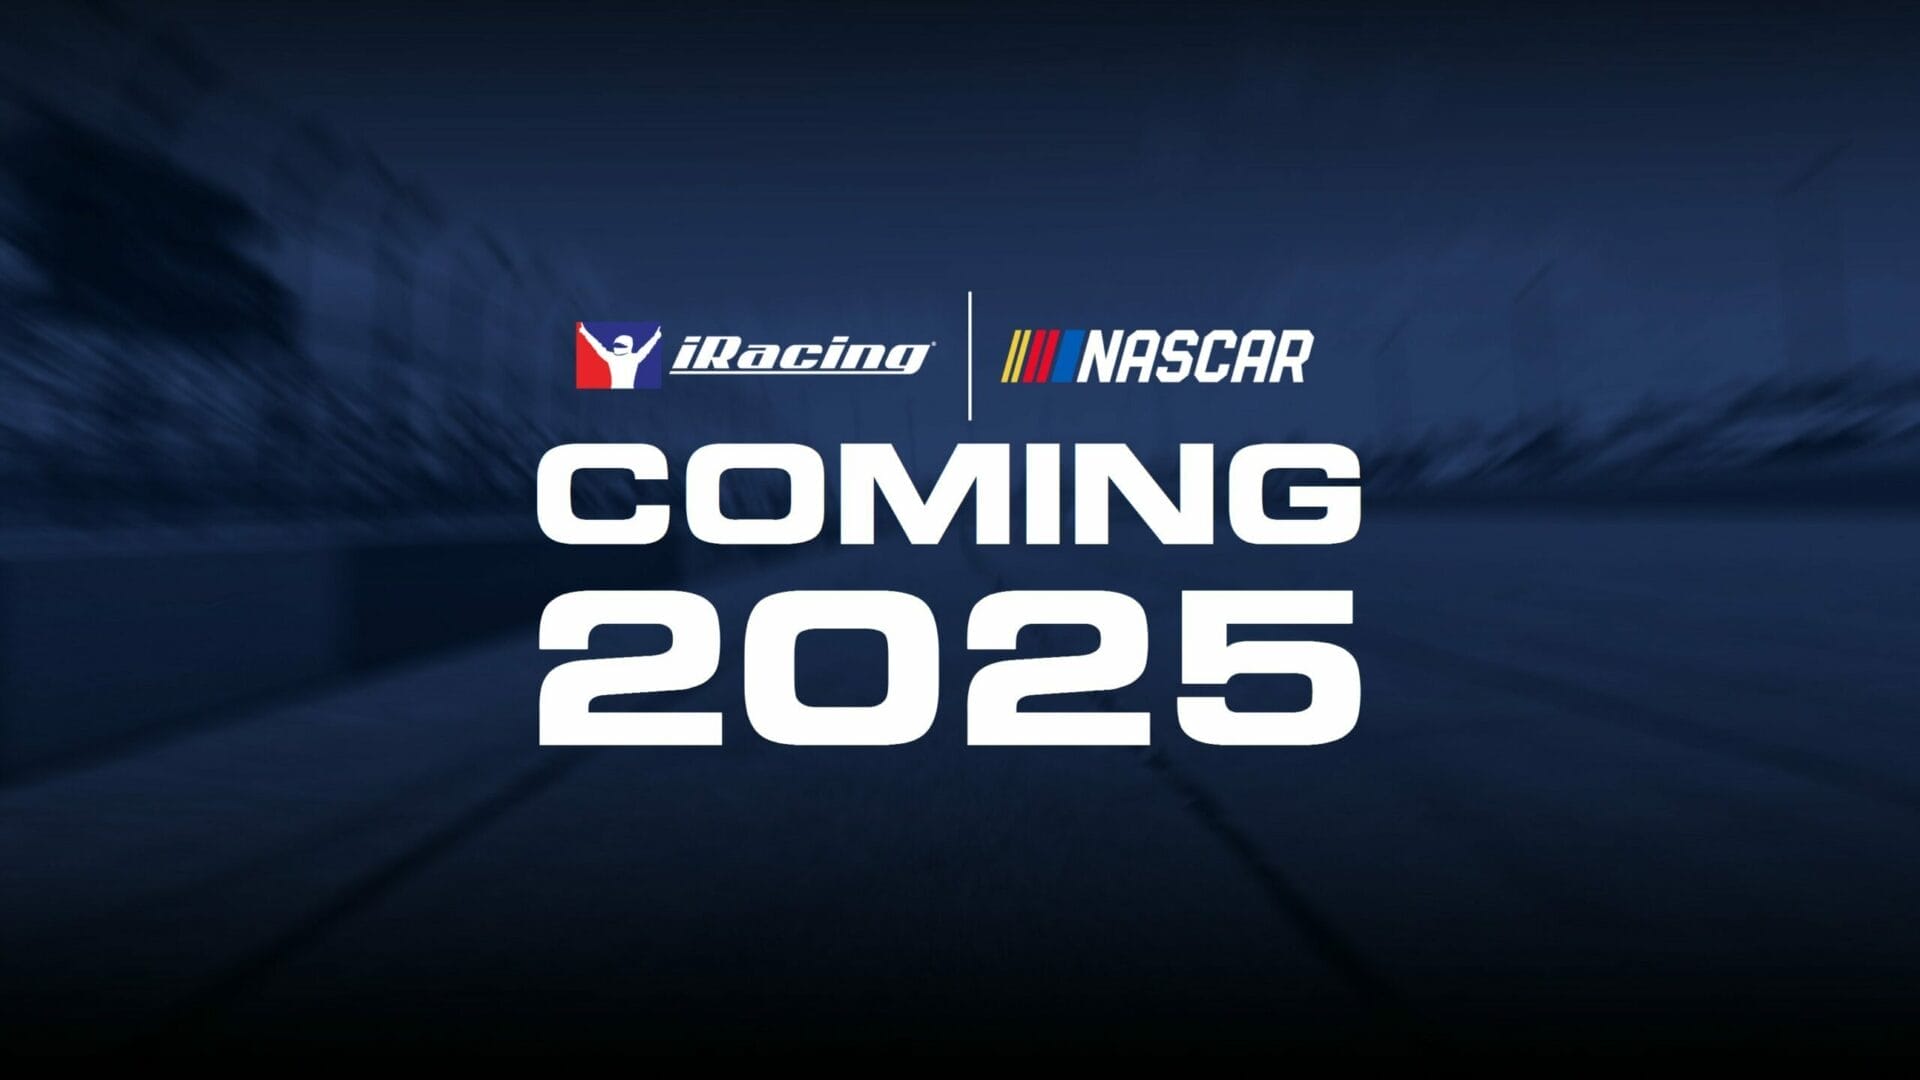 iRacing is Developing NASCAR Games for Consoles, PC, and Mobile